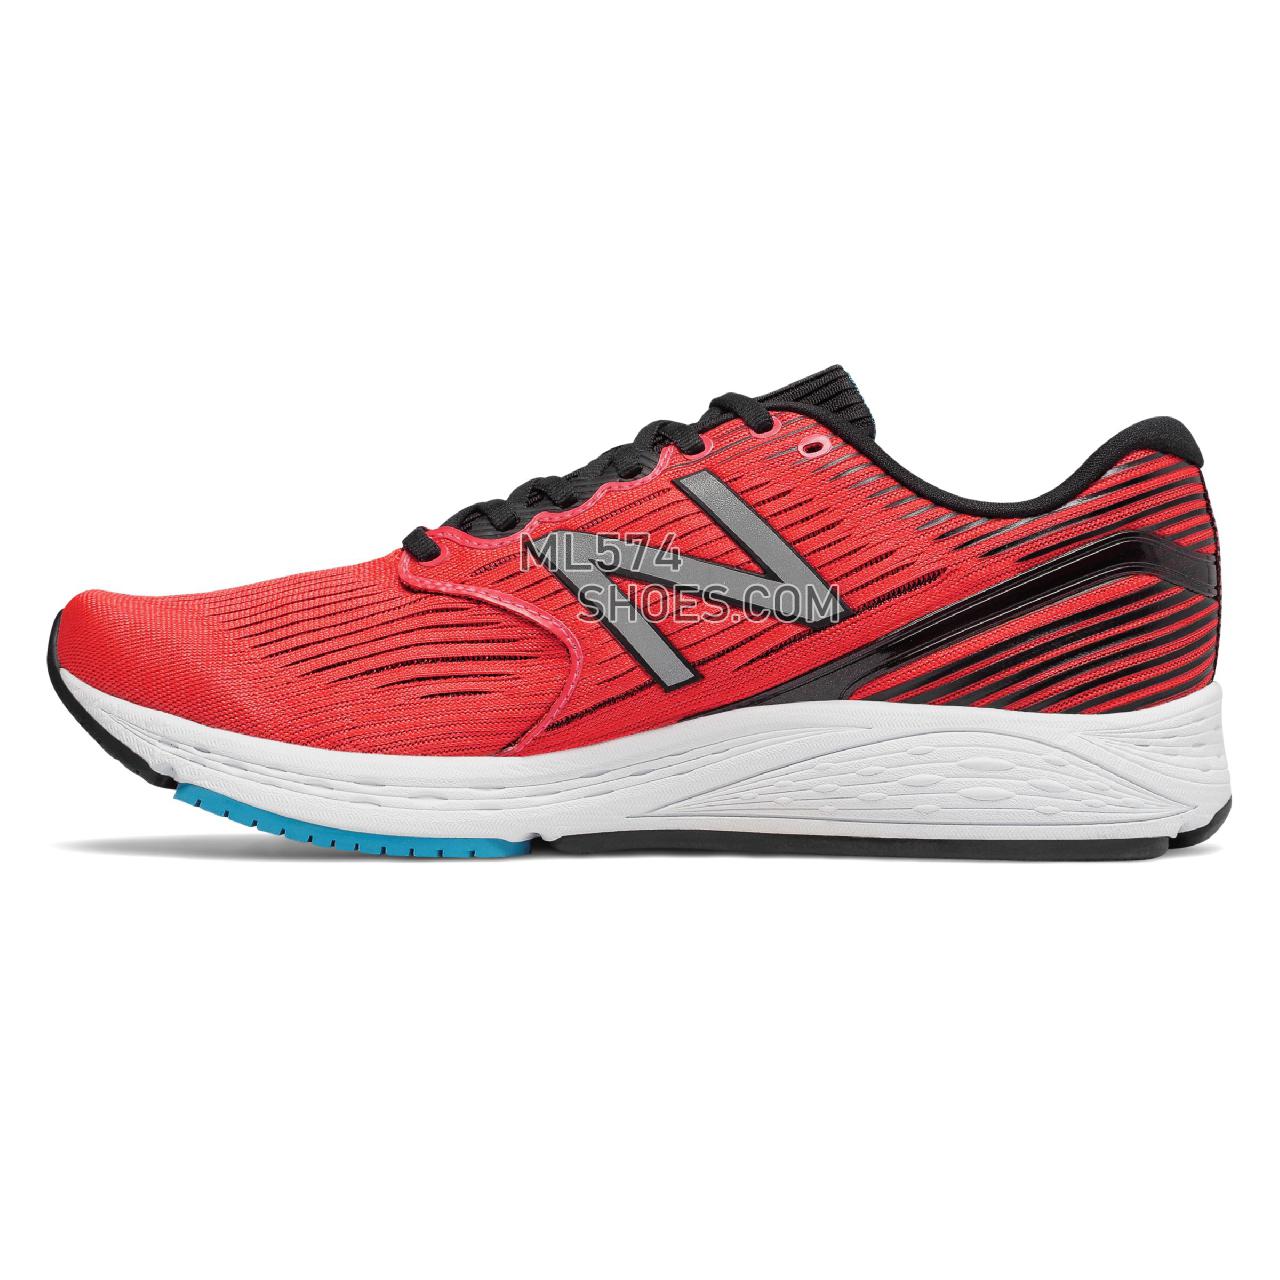 New Balance 890v6 - Men's 890 - Running Flame with Black and White - M890FB6